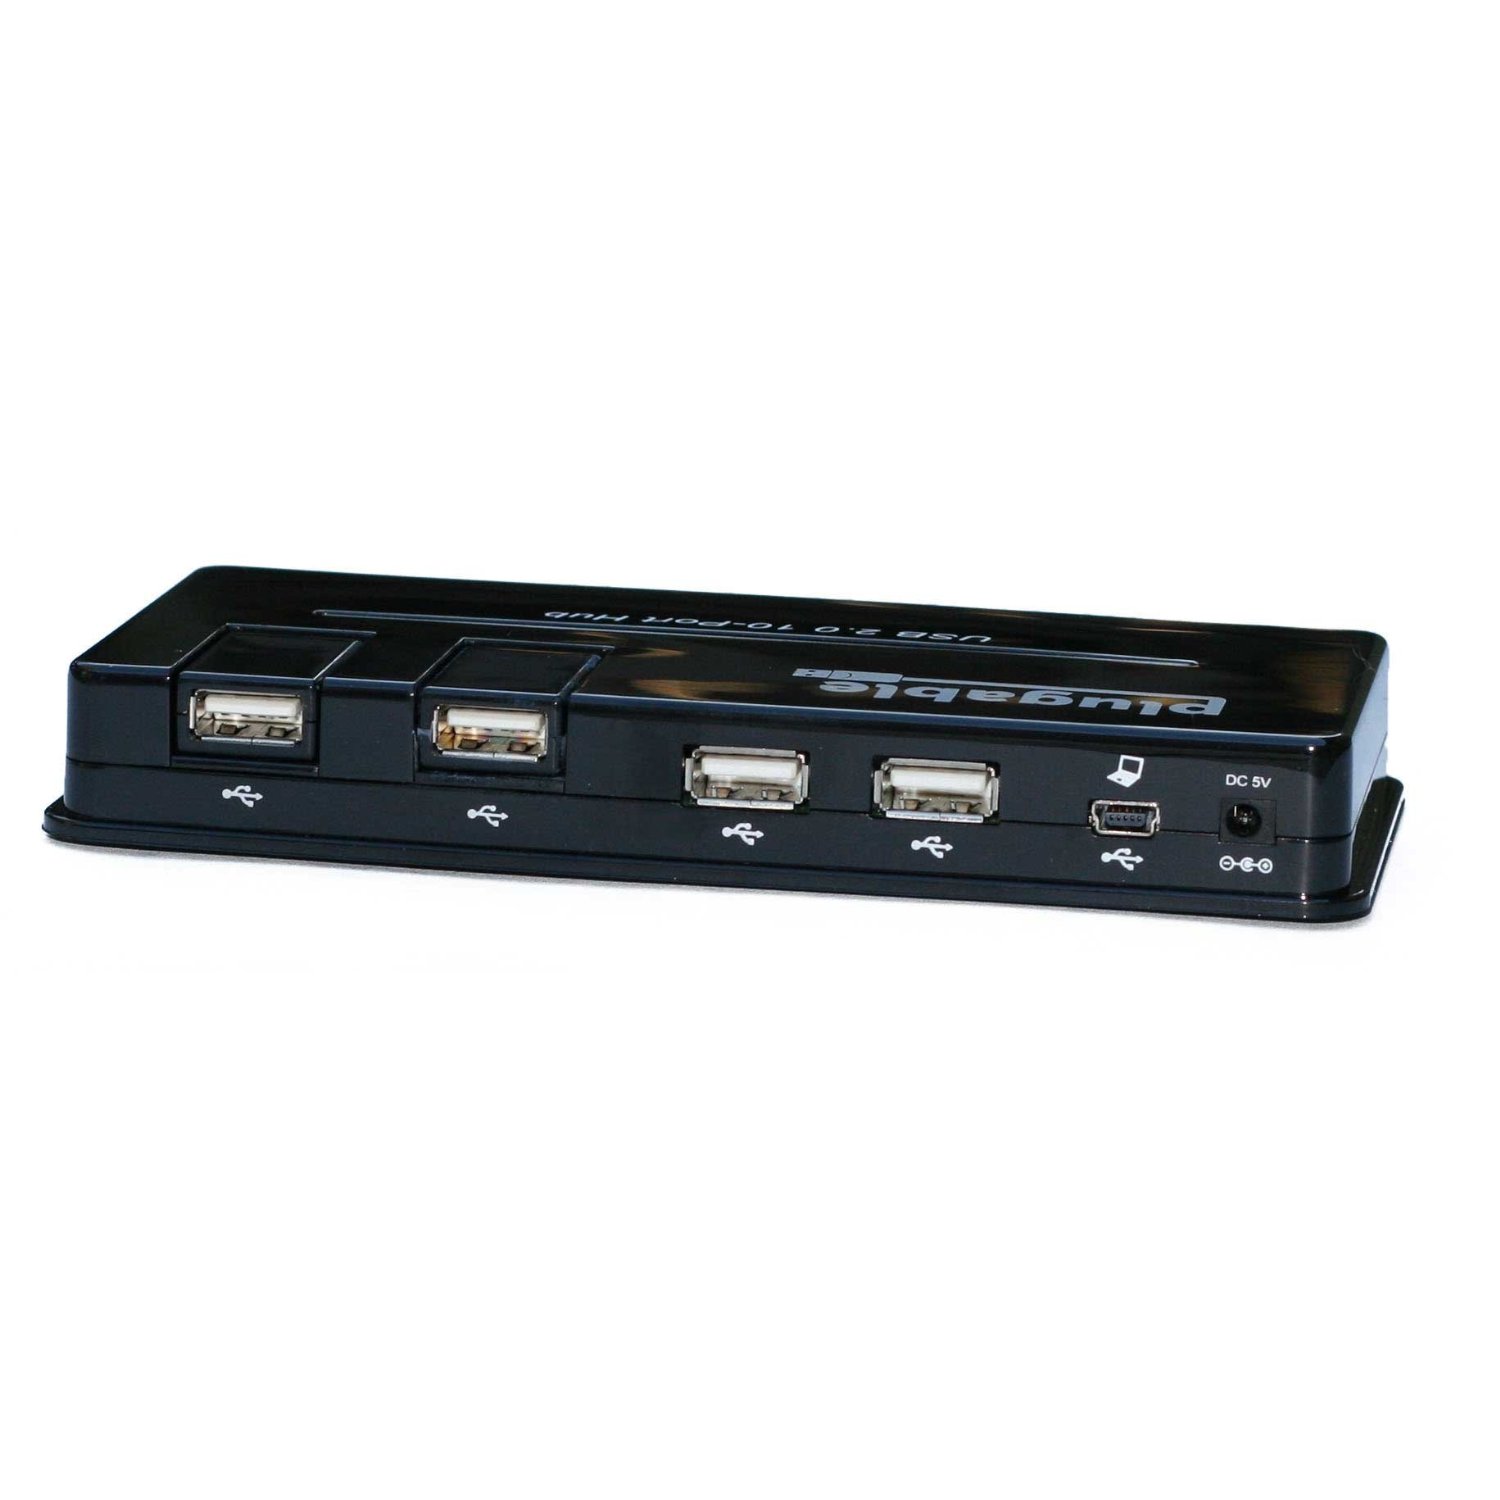 http://thetechjournal.com/wp-content/uploads/images/1201/1325695390-plugable-usb-20-10-port-hub-with-power-adapter-4.jpg